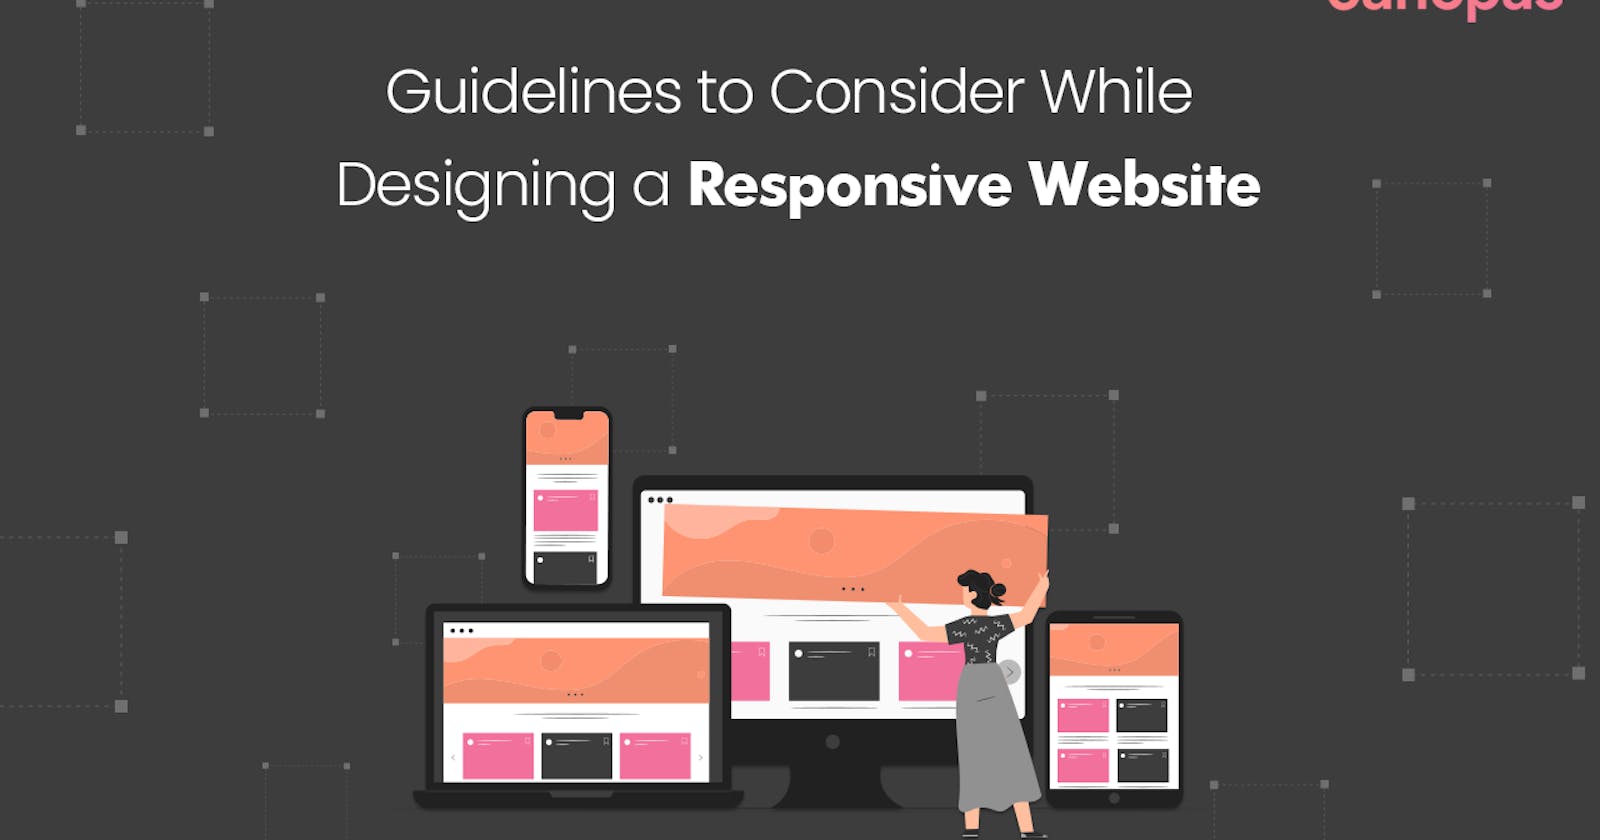 A comprehensive guide on how to design a responsive website.